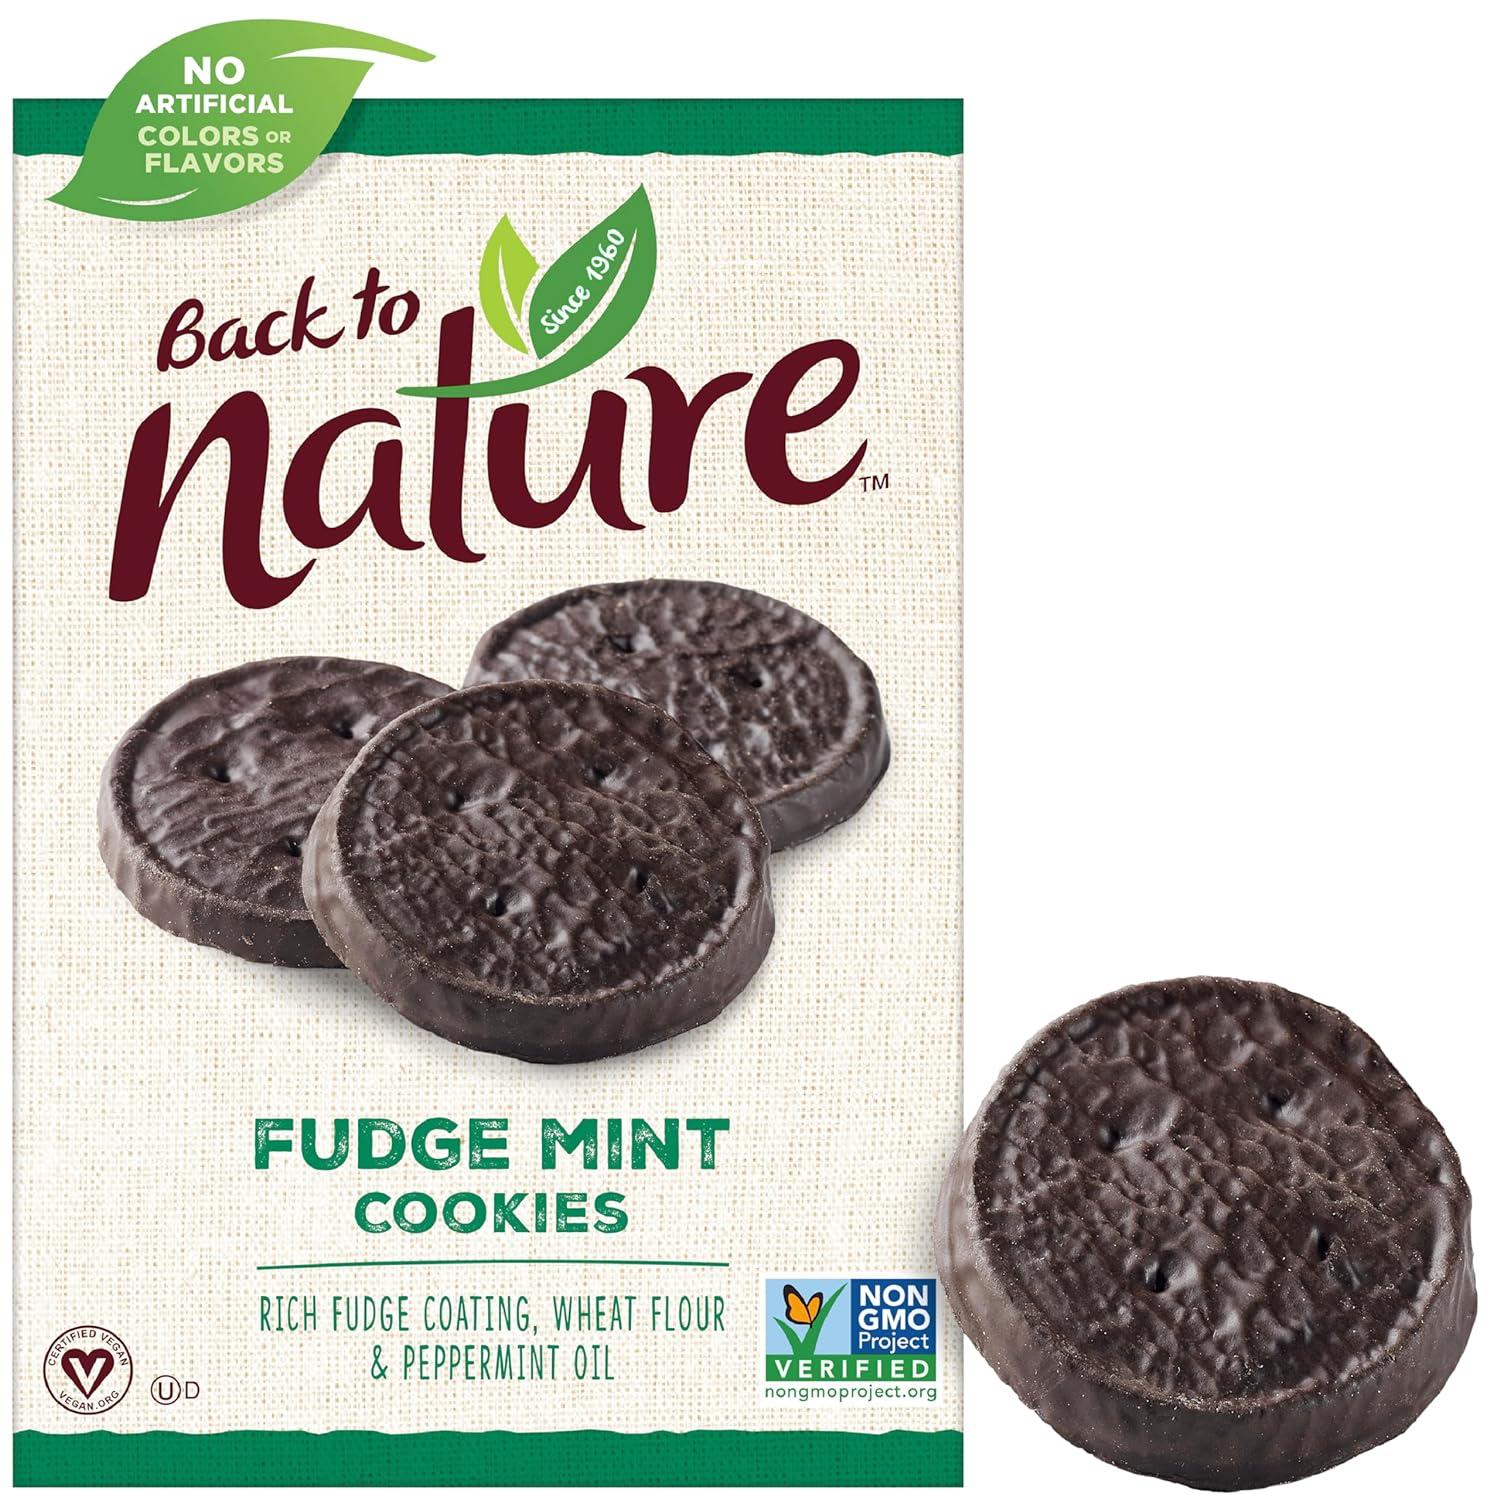 Back to Nature Fudge Mint Cookies for $2.60